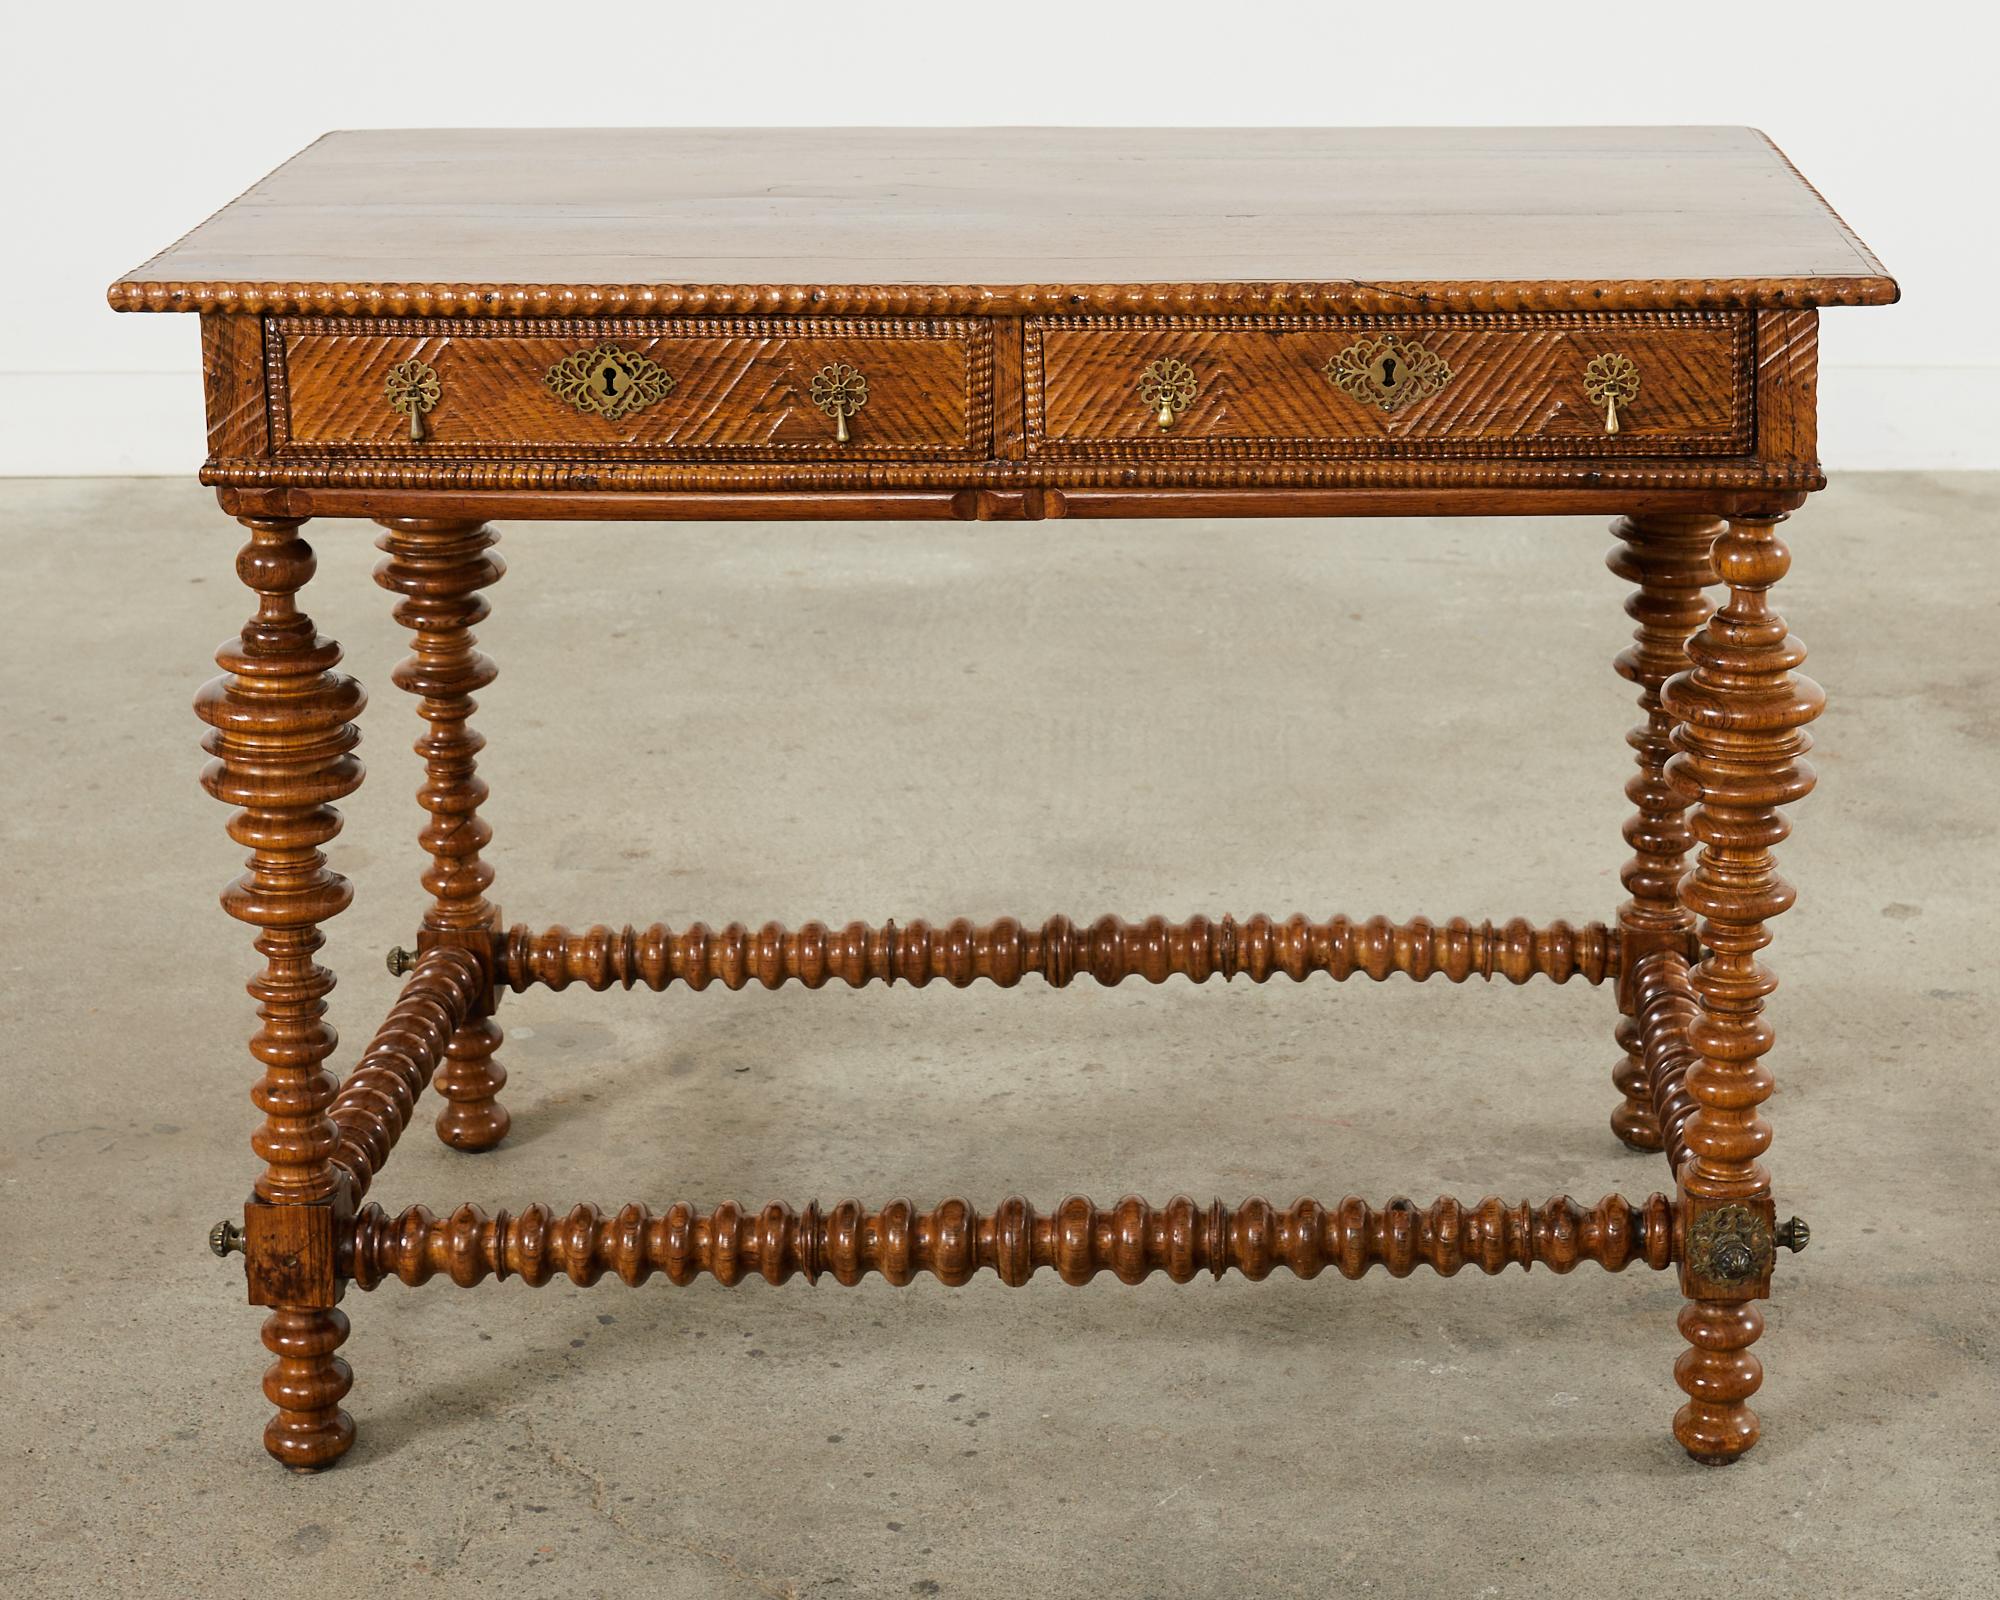 Hand-Crafted 17th Century Portuguese Baroque Rosewood Library Center Table For Sale